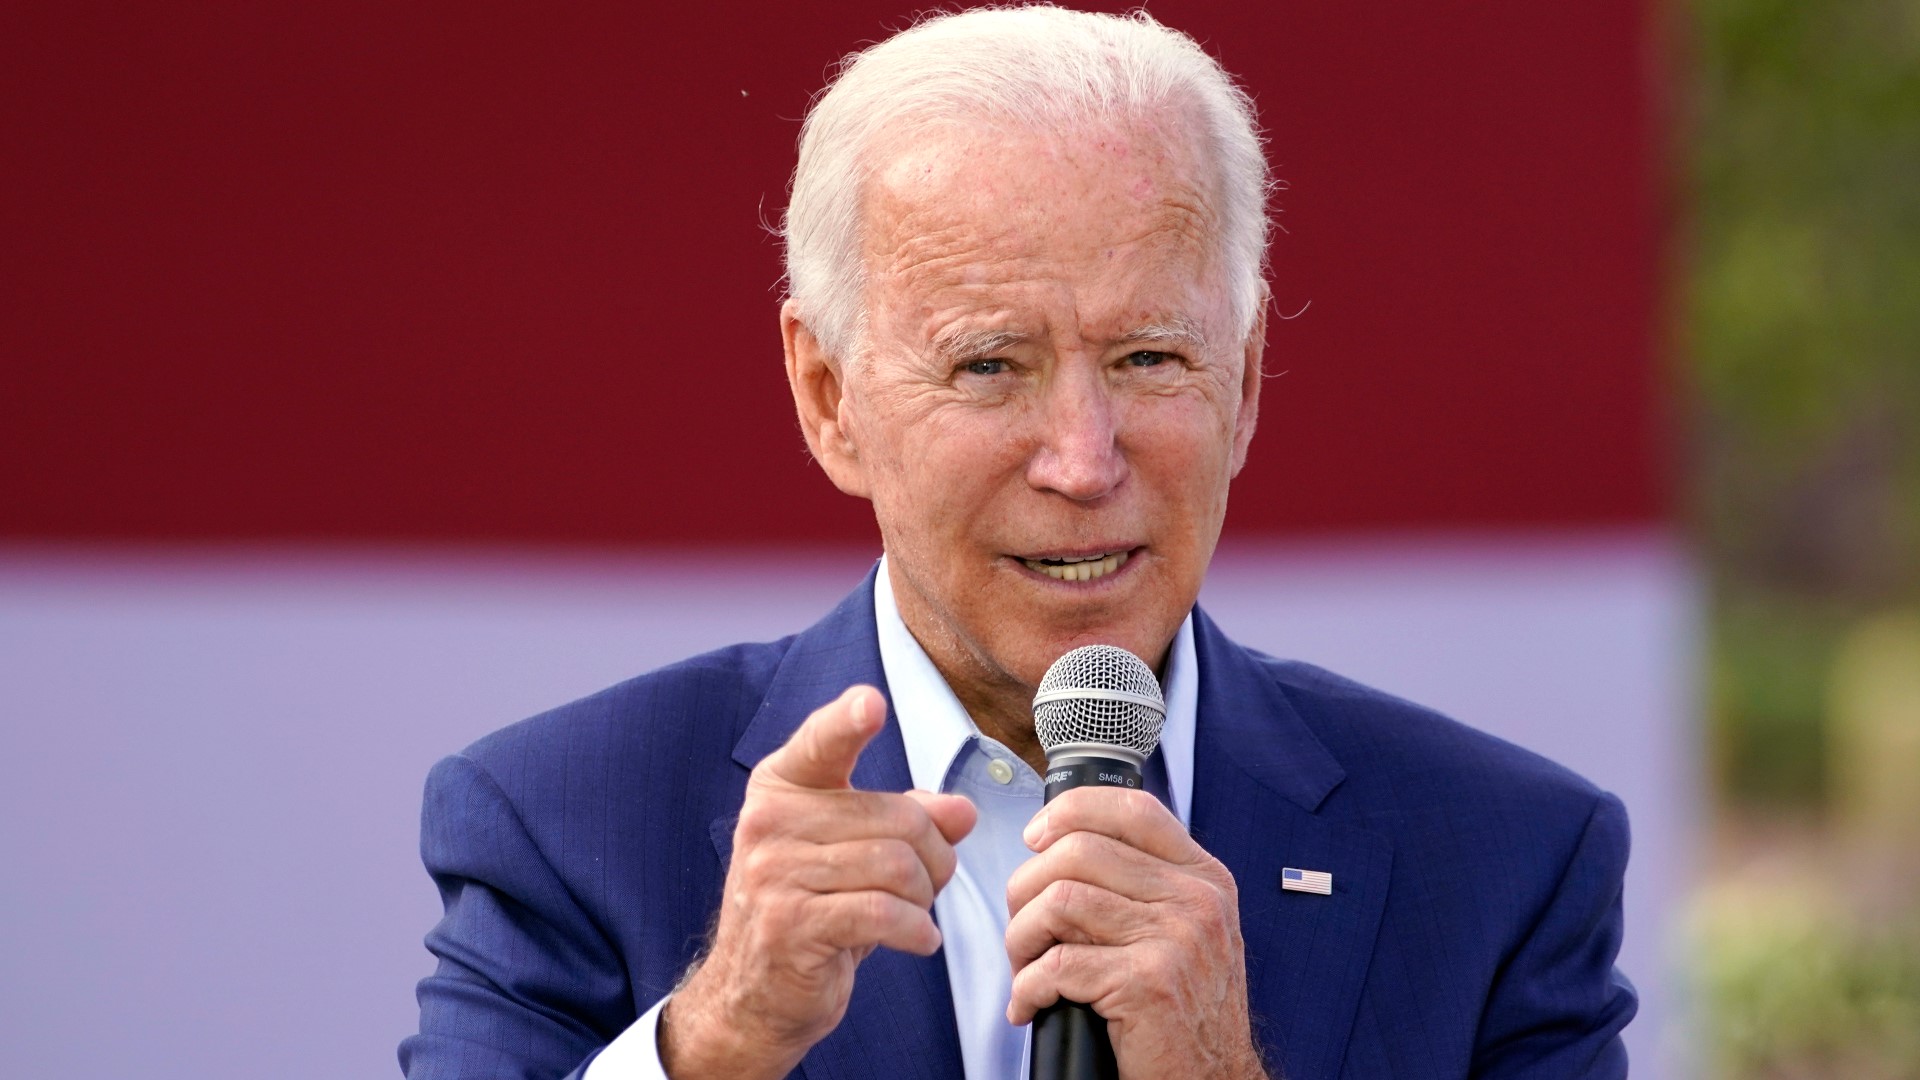 Wednesday was Joe Biden's first trip to Charlotte since becoming the democratic nominee for president.